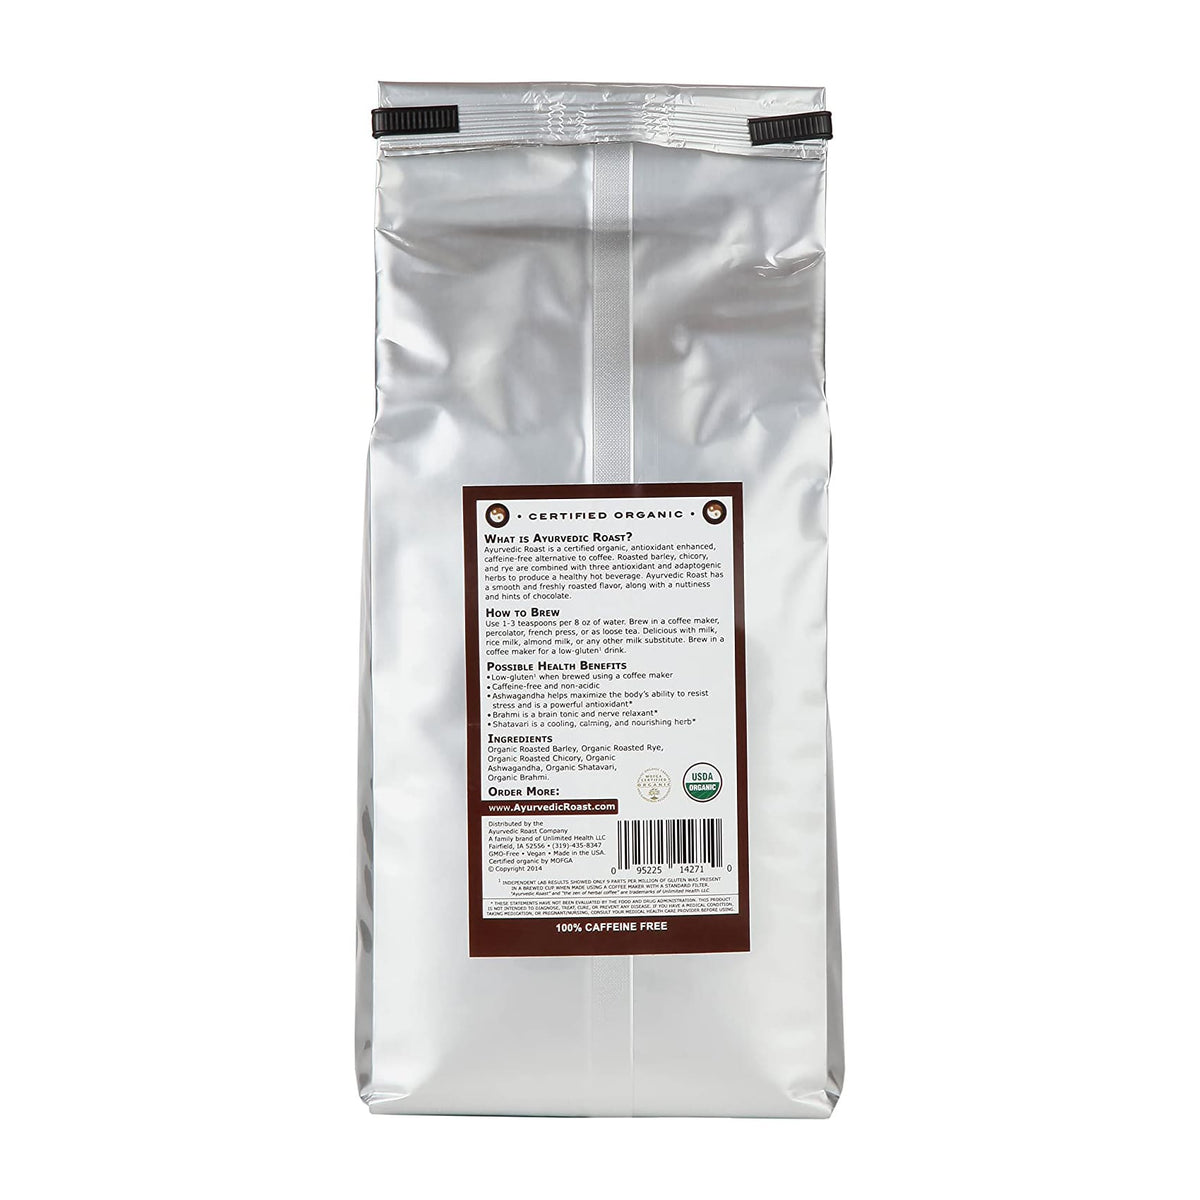 Ayurvedic Roast - Unflavored Caffeine Free Certified Organic Coffee Substitute - Only Tasty Goods Inc.